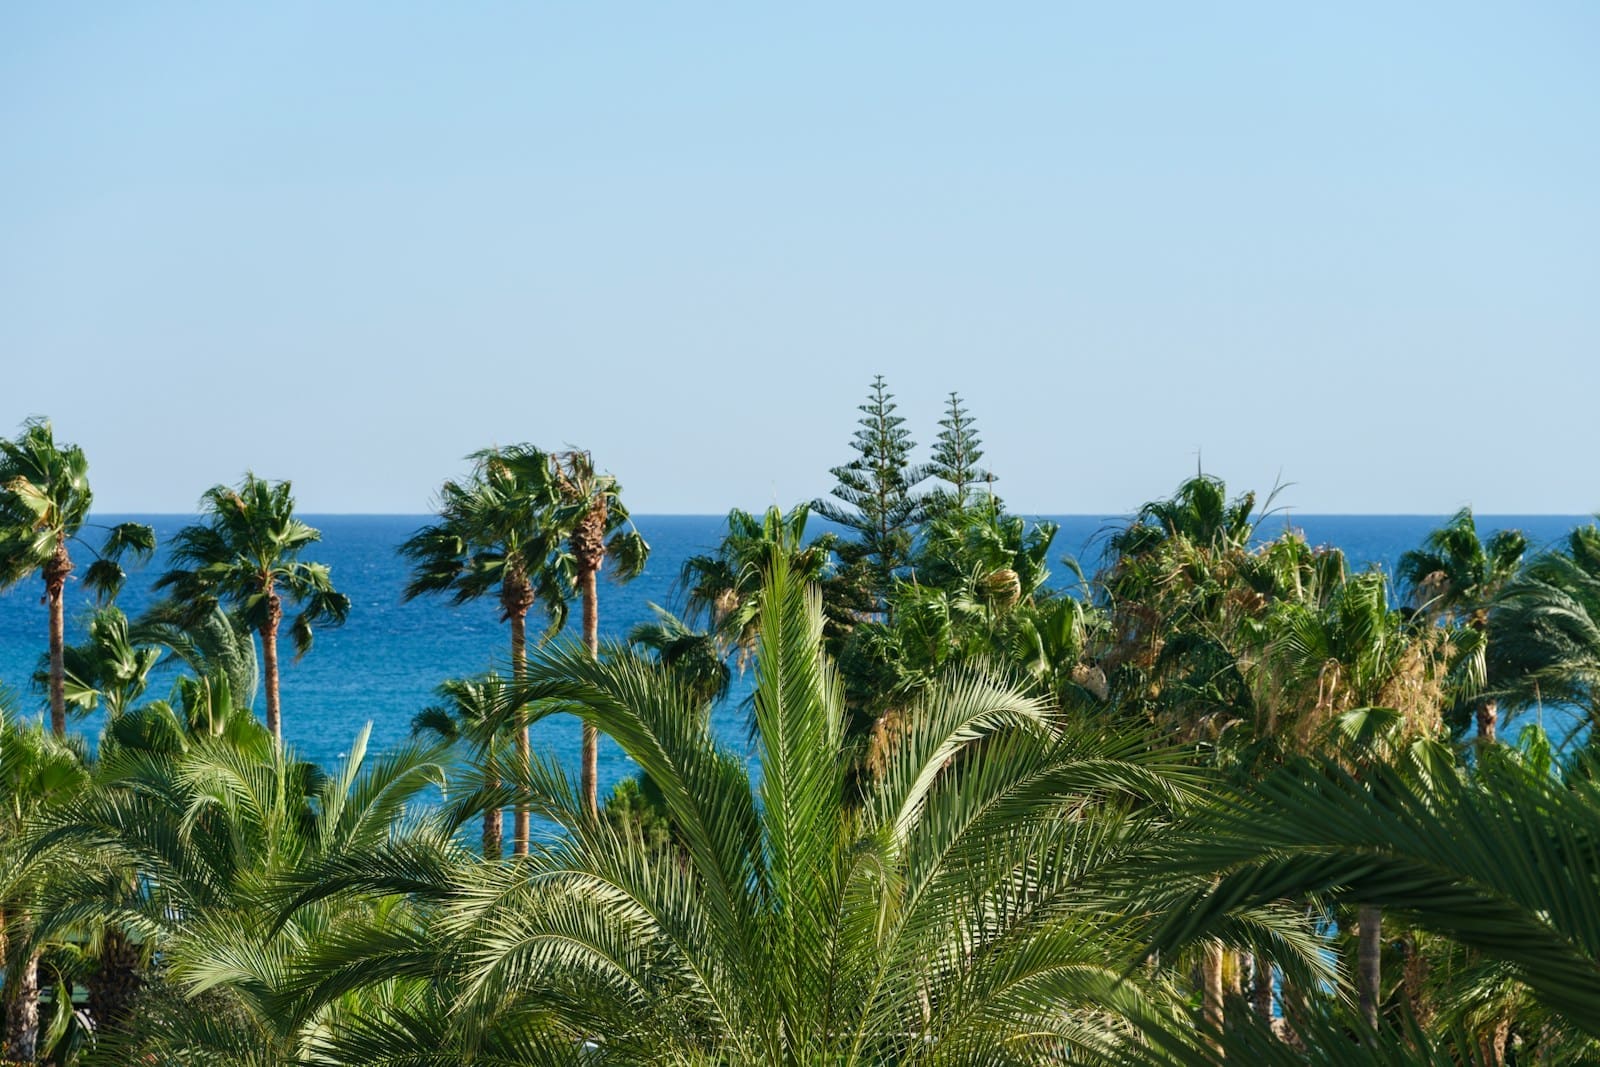 a view of the ocean through palm trees